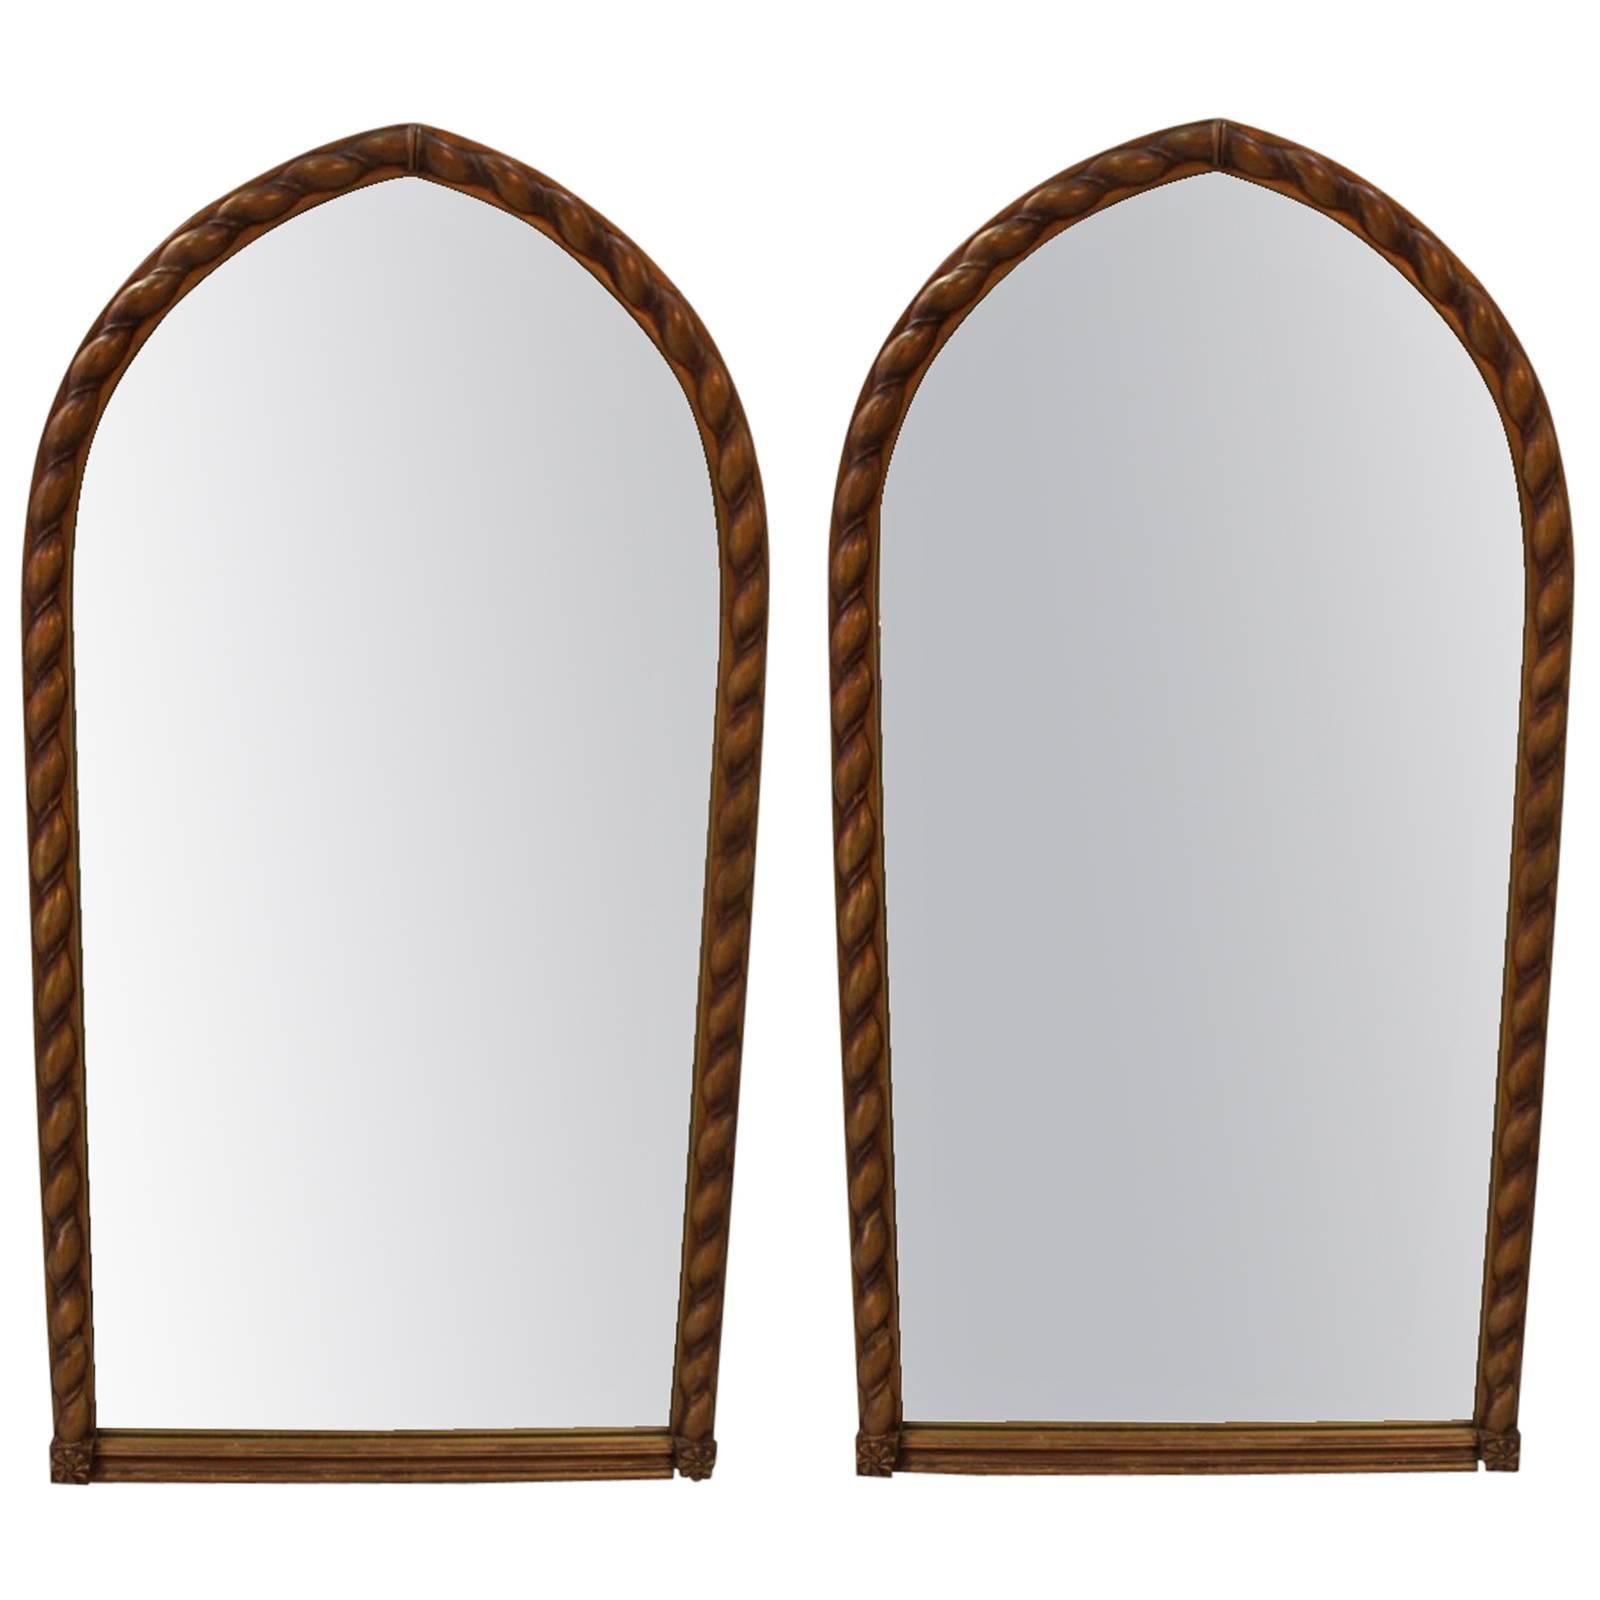 Pair of Arced Top Gothic Revival Giltwood Mirrors